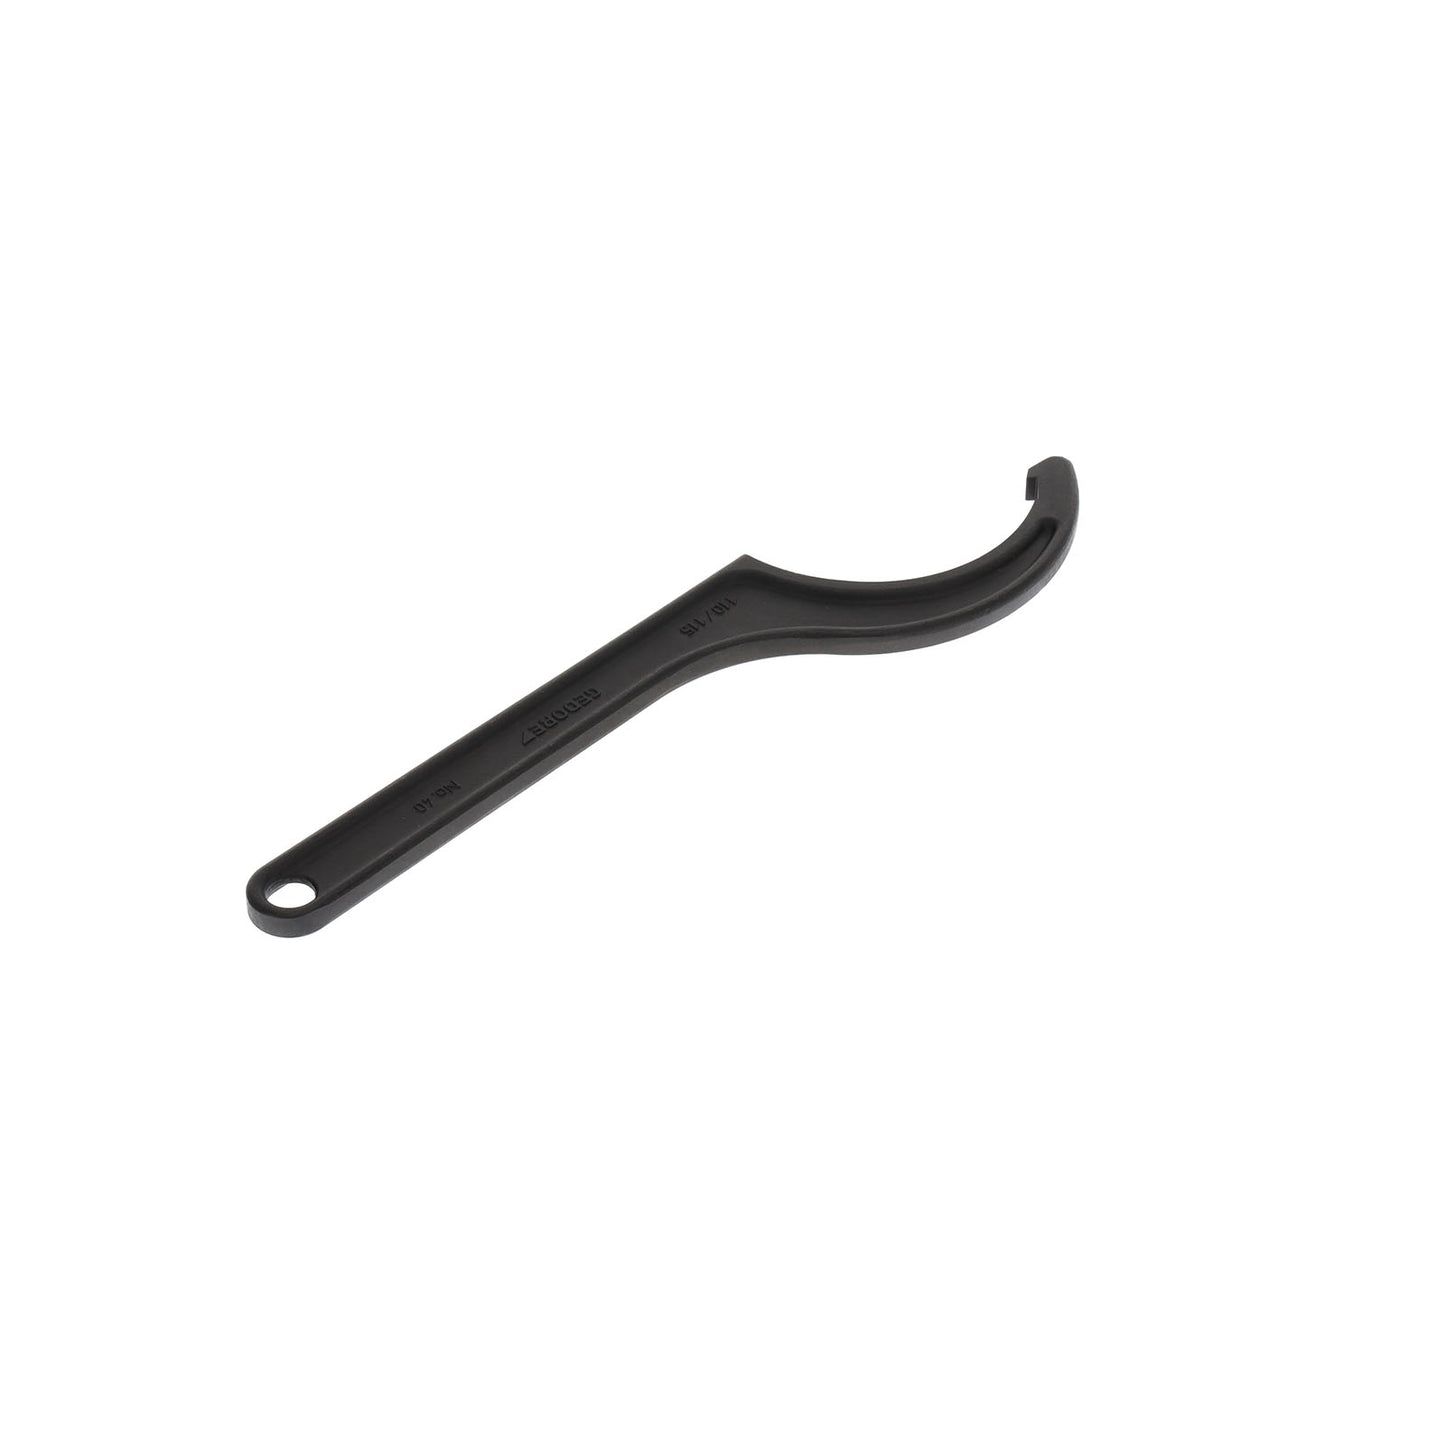 GEDORE 40 110-115 - Hook Wrench, 110-115 (6335260)